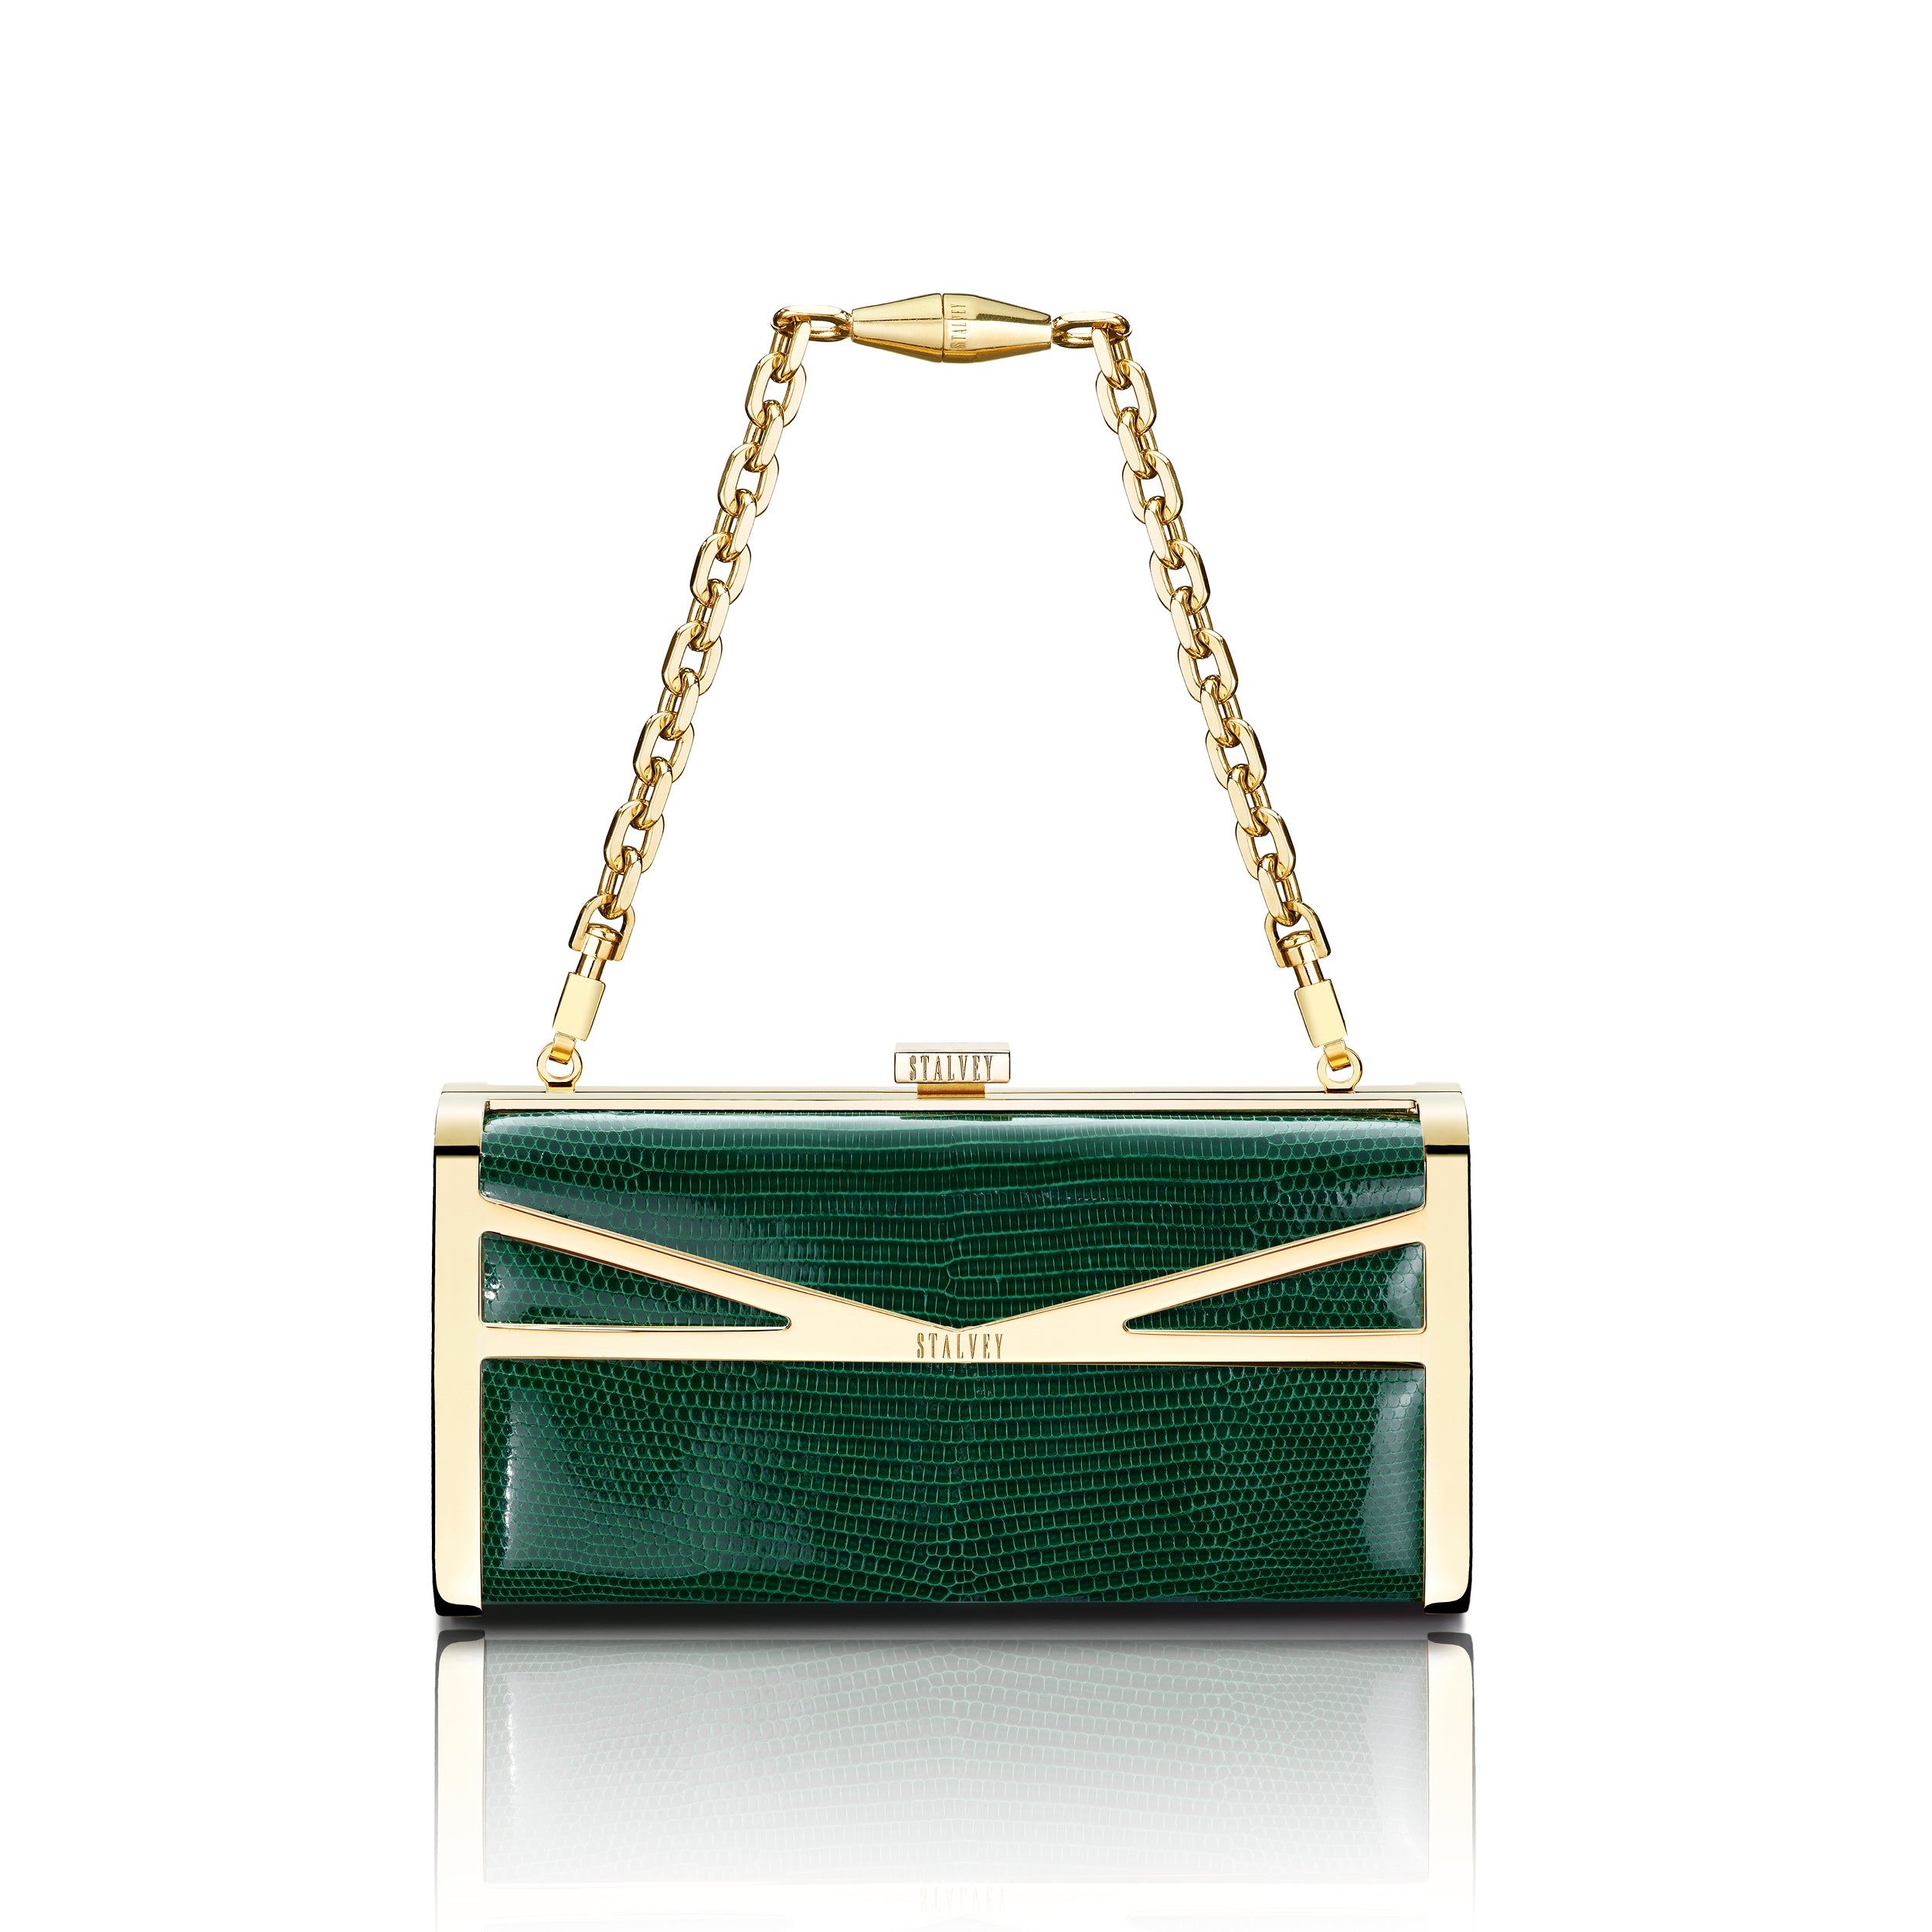 STALVEY Square Clutch in Emerald Lizard with 24kt Gold Hardware Front View with Chain